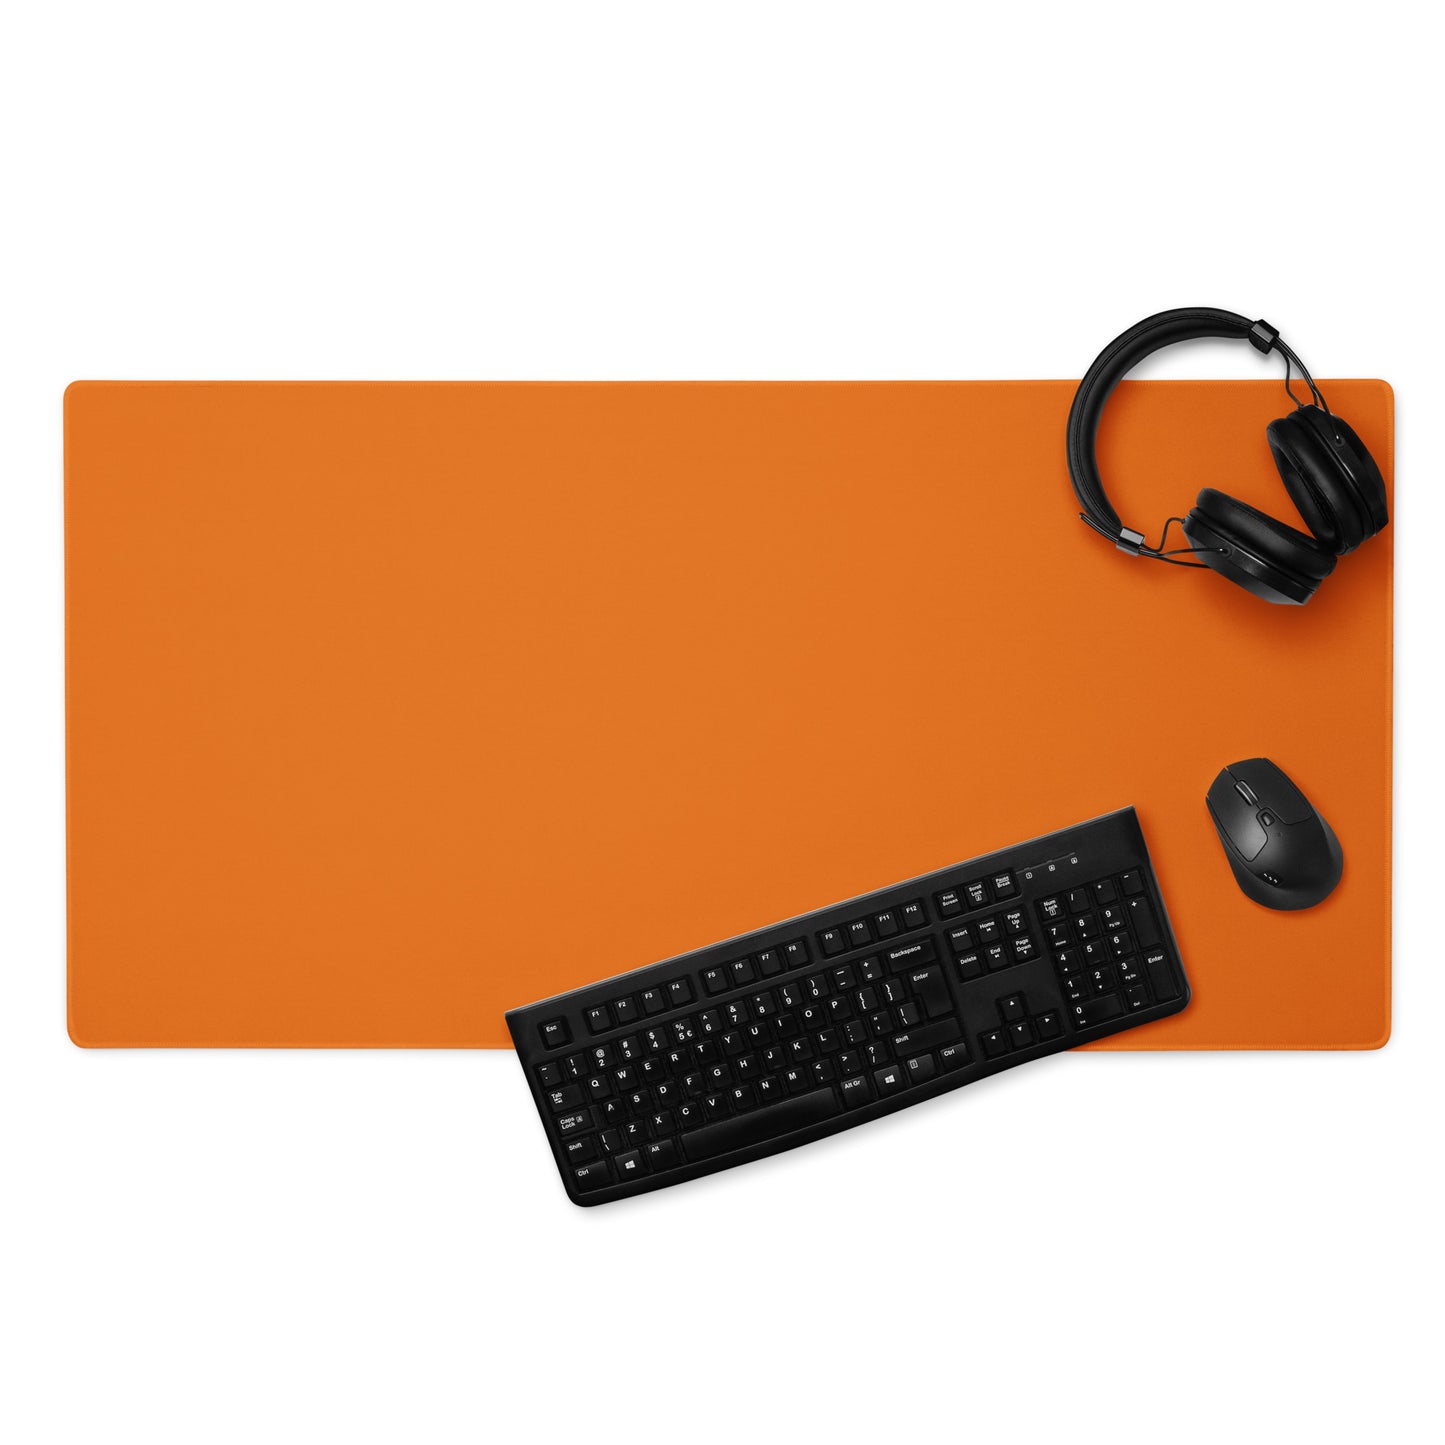 A 36" x 18" orange gaming desk pad with a keyboard, mouse, and headphones sitting on it.